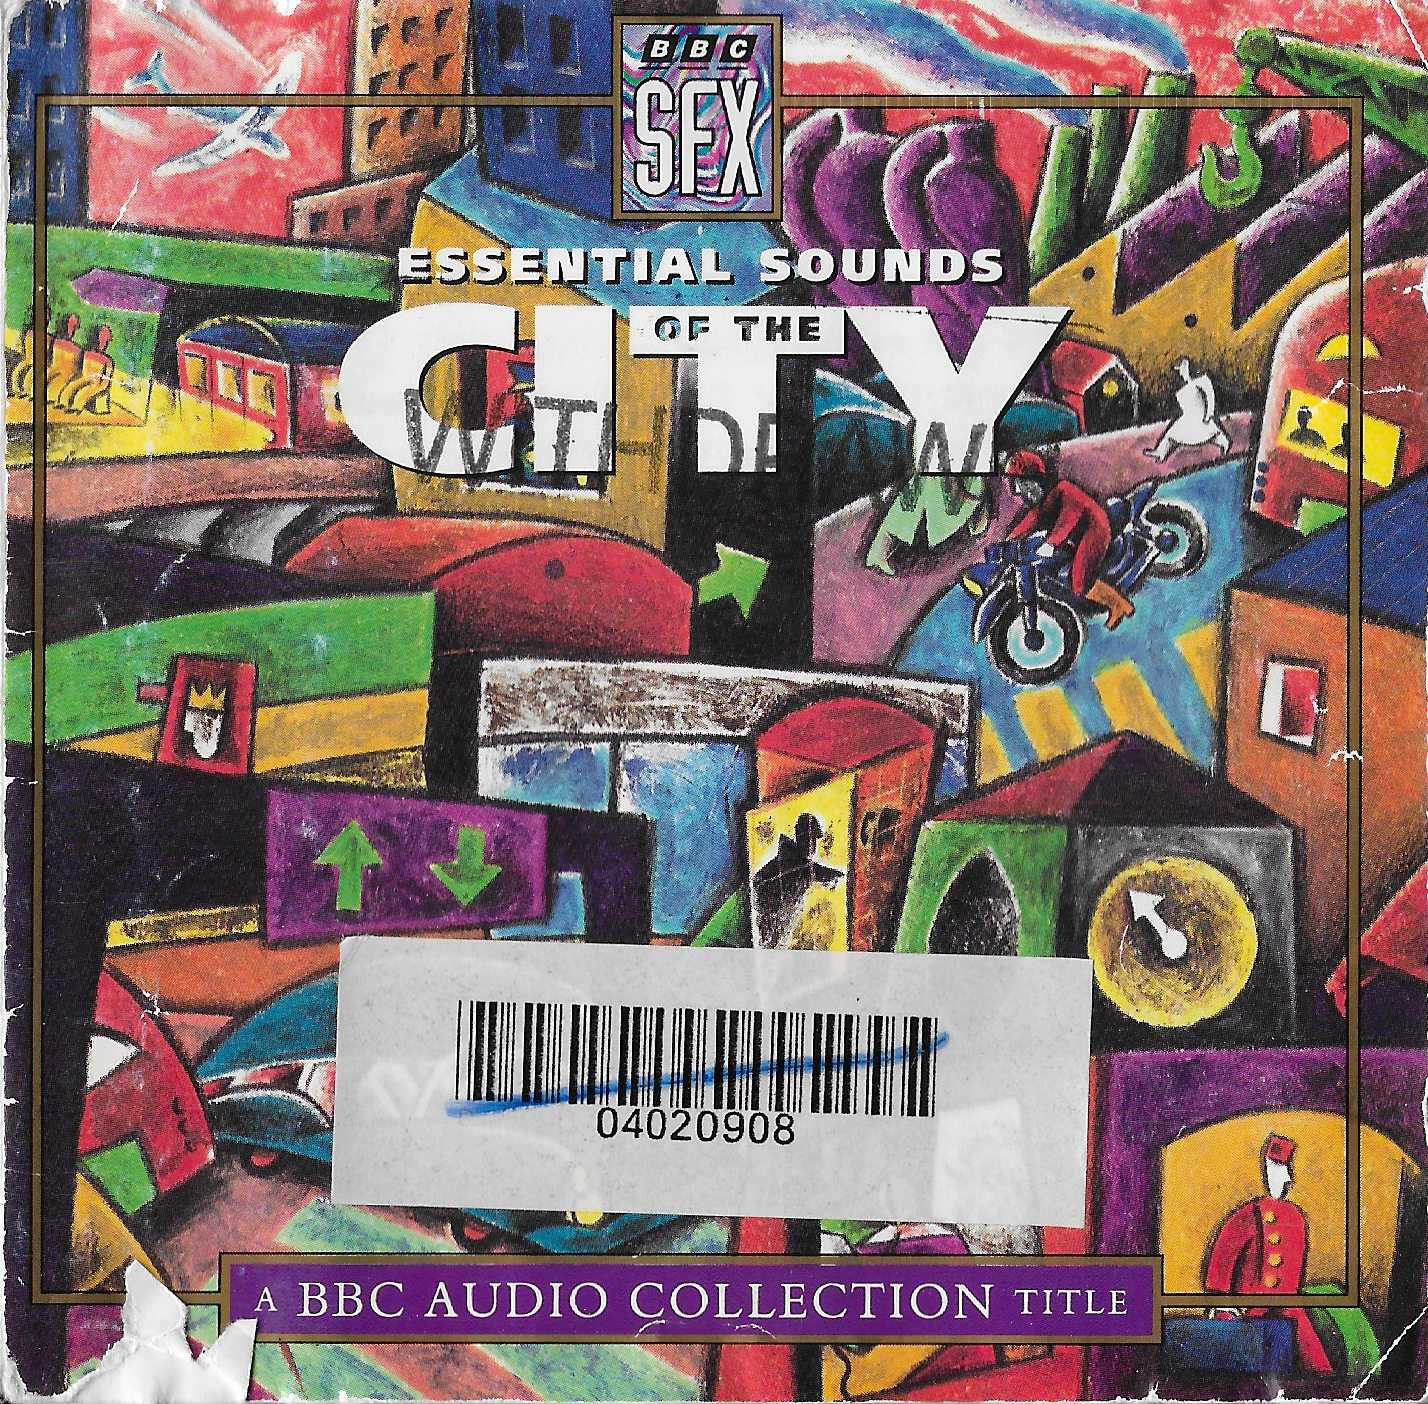 Picture of BBCCD860 Essential sounds of the city by artist Various from the BBC cds - Records and Tapes library